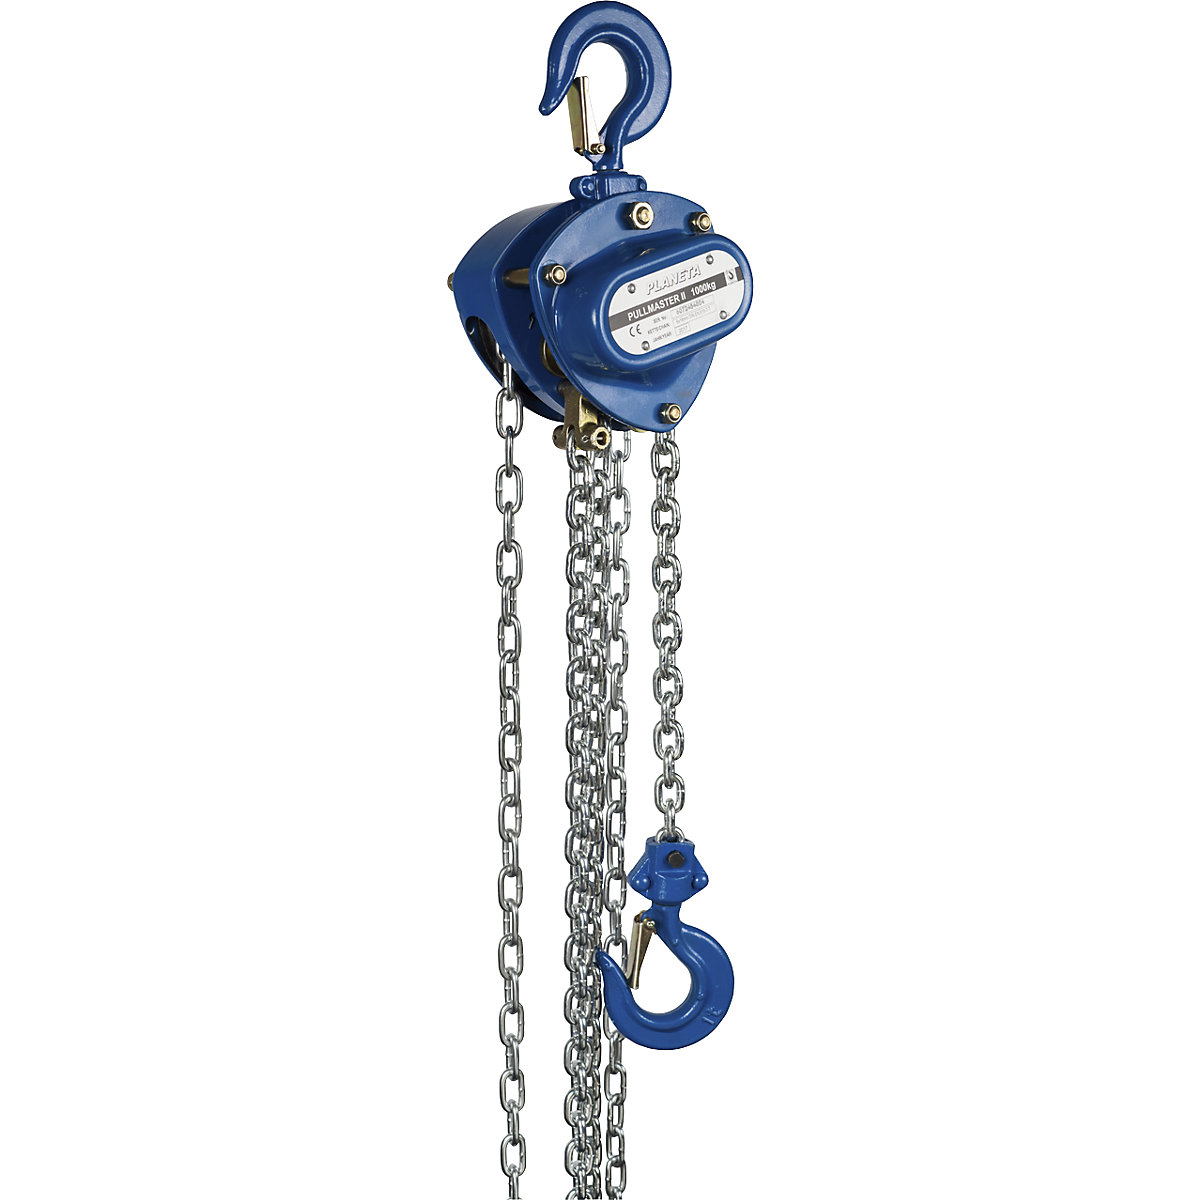 PULLMASTER-II spur gear block and tackle